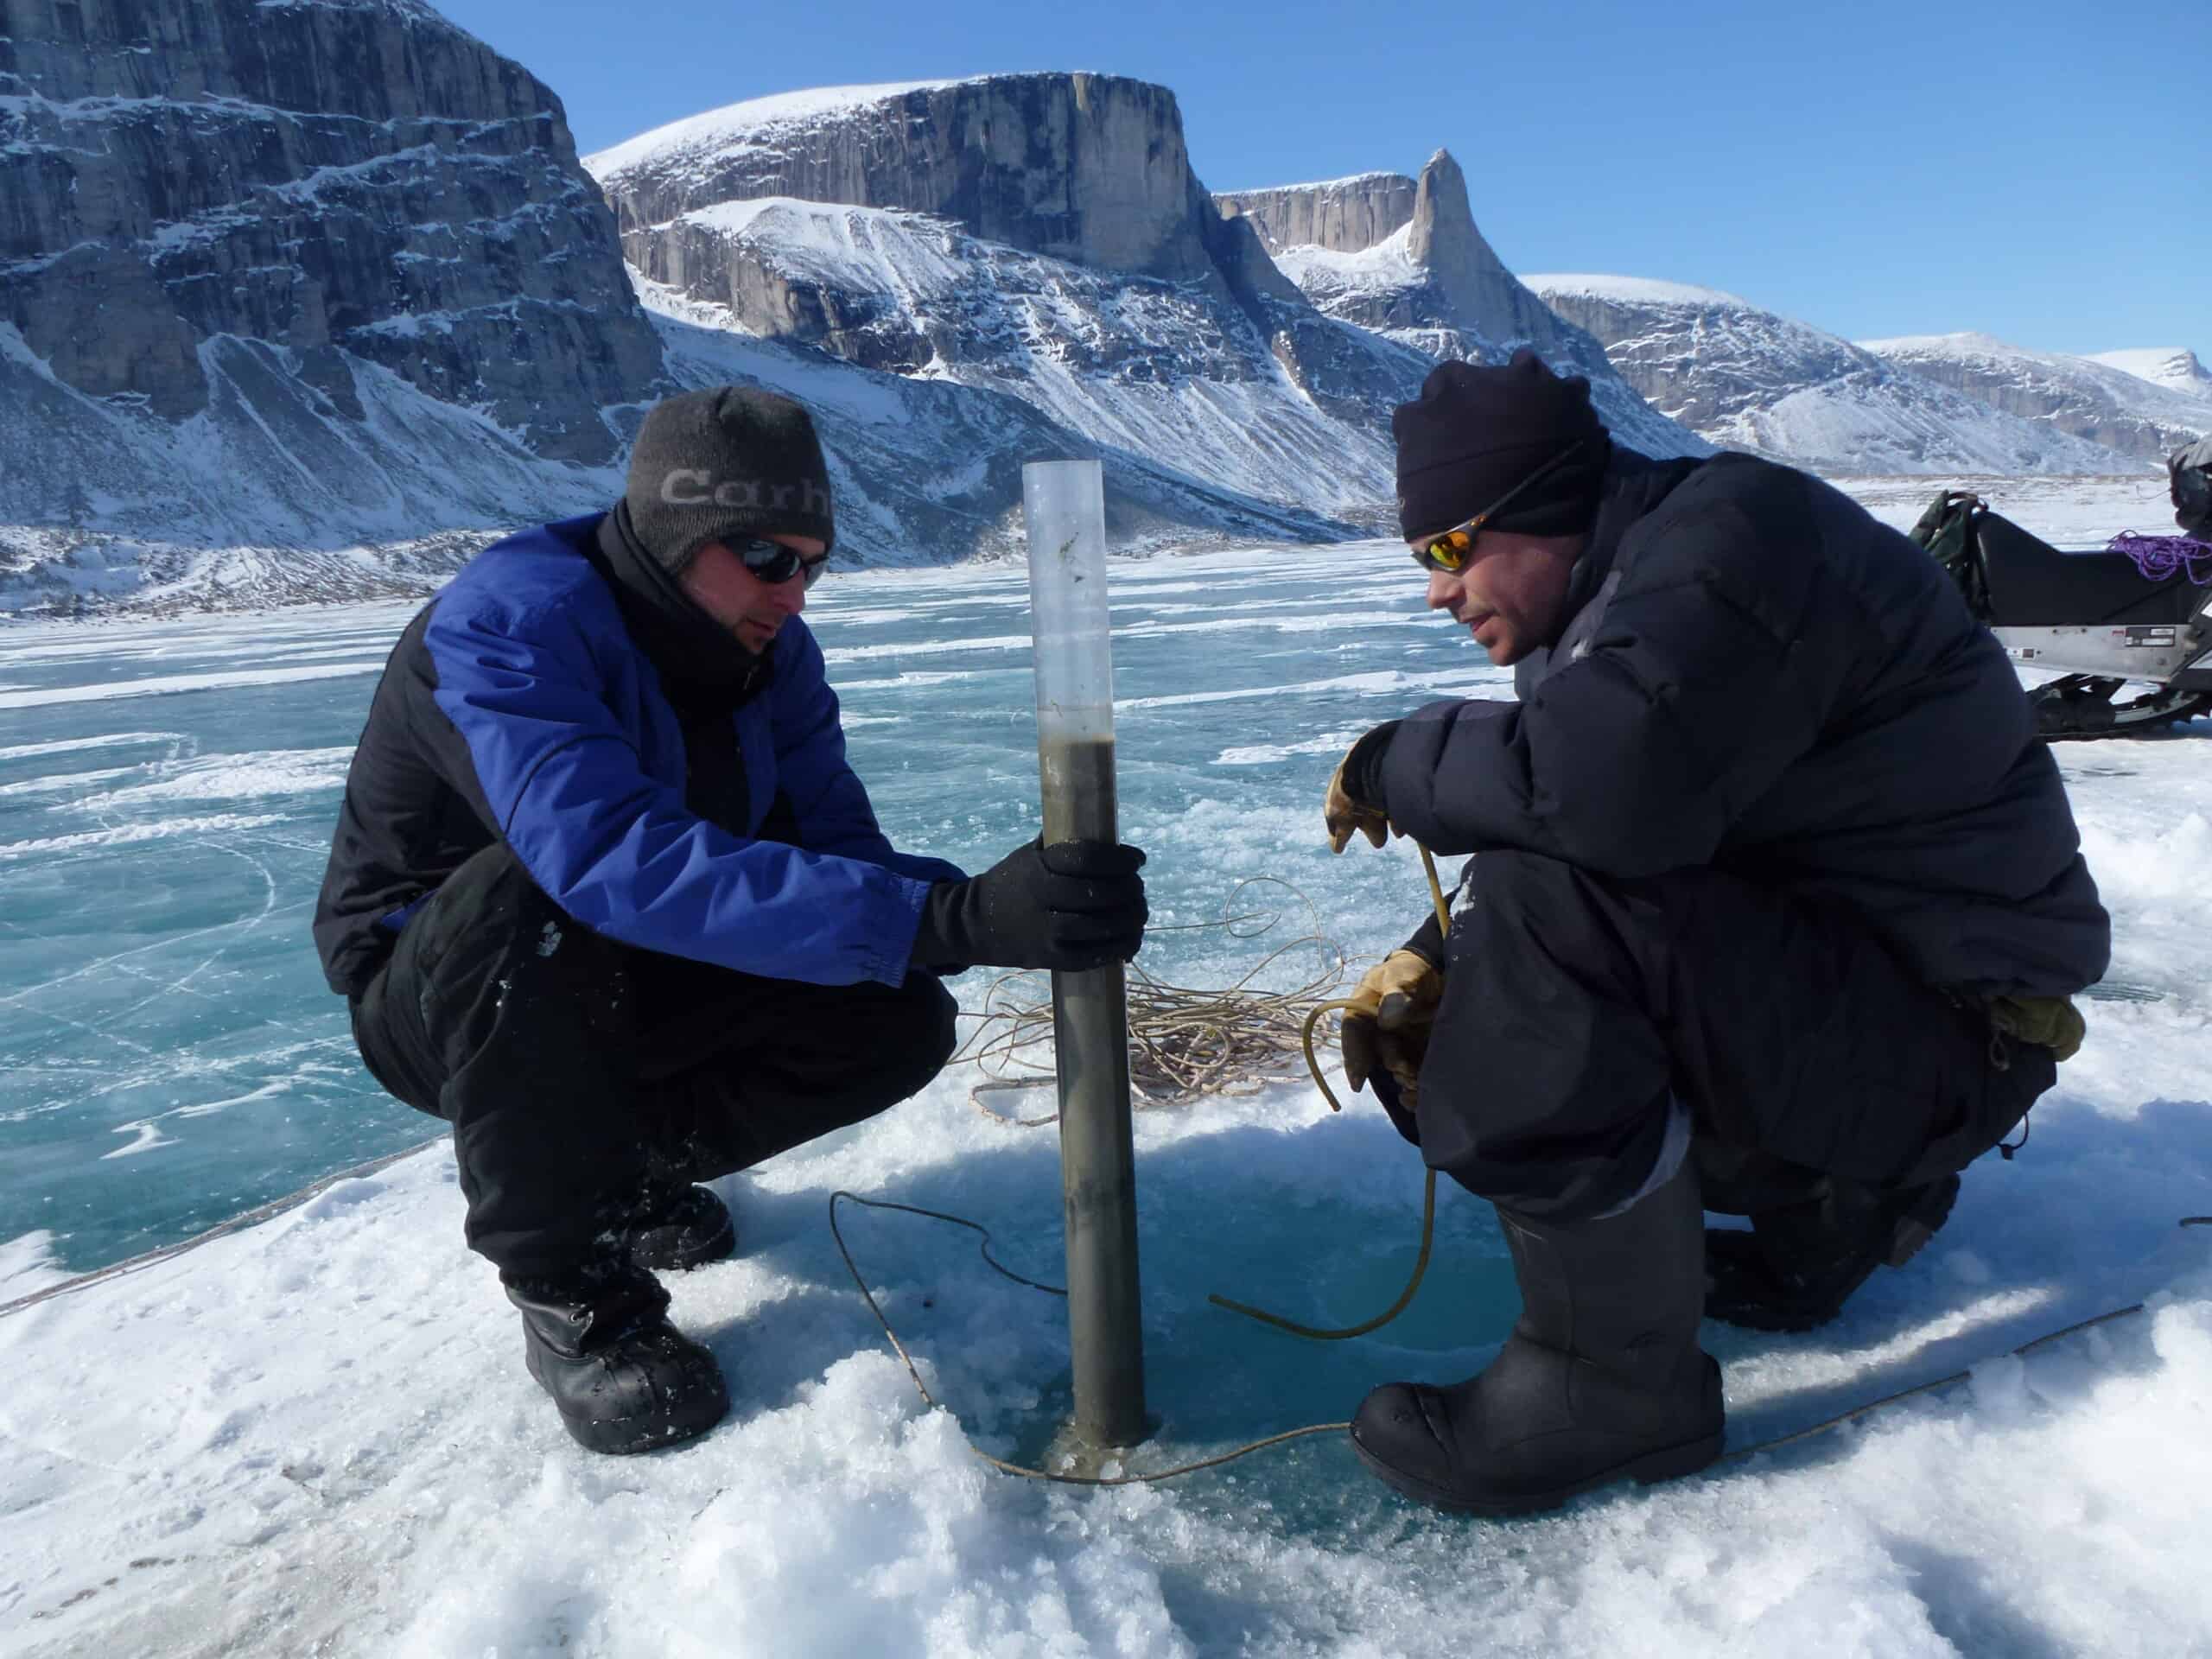 Two men in snow suits and sunglasses are crouched on ice taking an ice core sample, snow-covered mountain cliffs in background.